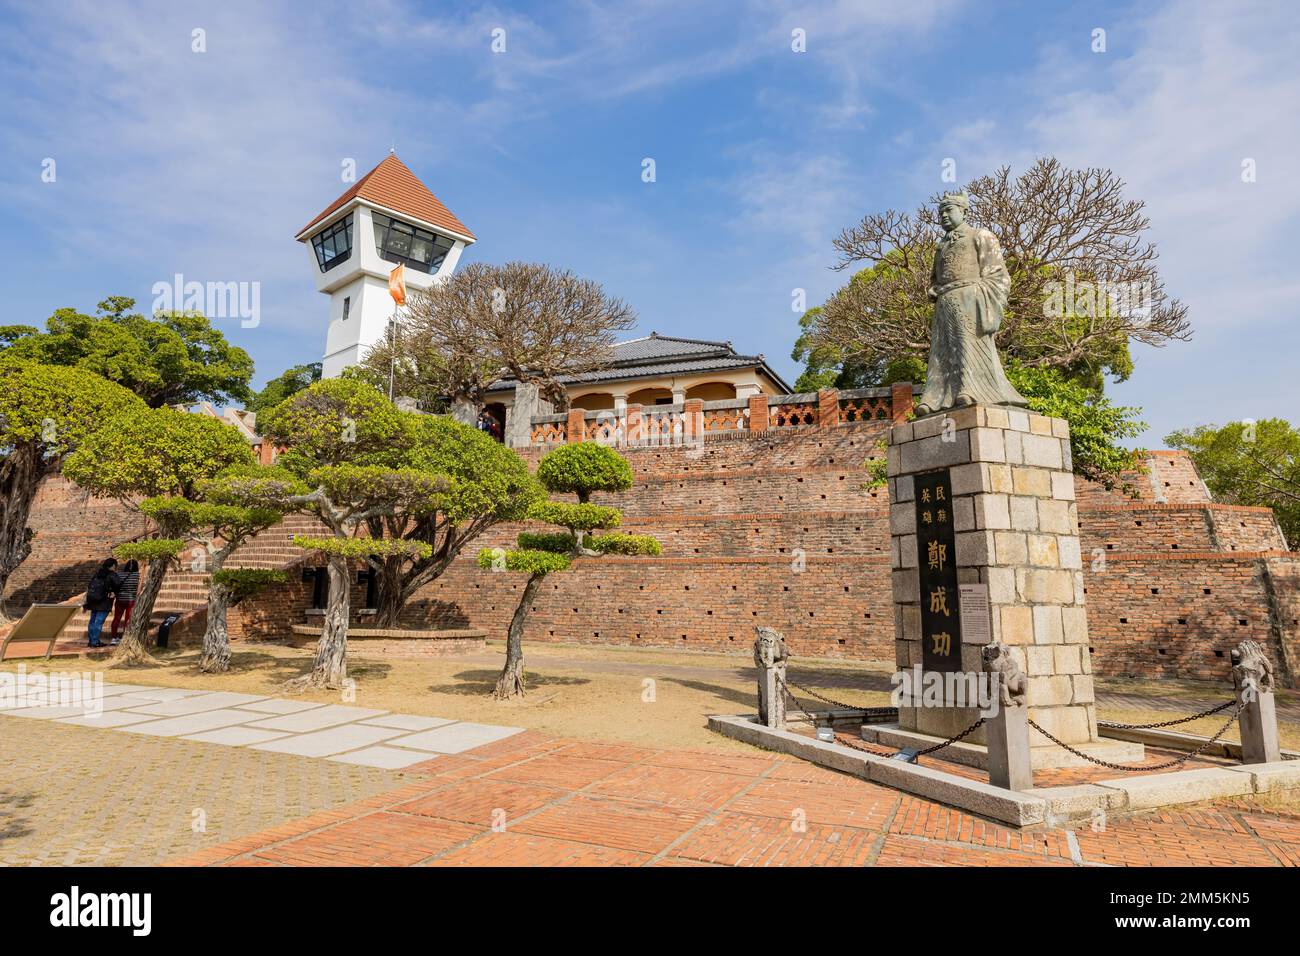 Tainan, JAN 5 2023 - Sunny exterior view of the Anping Old Fort Stock Photo